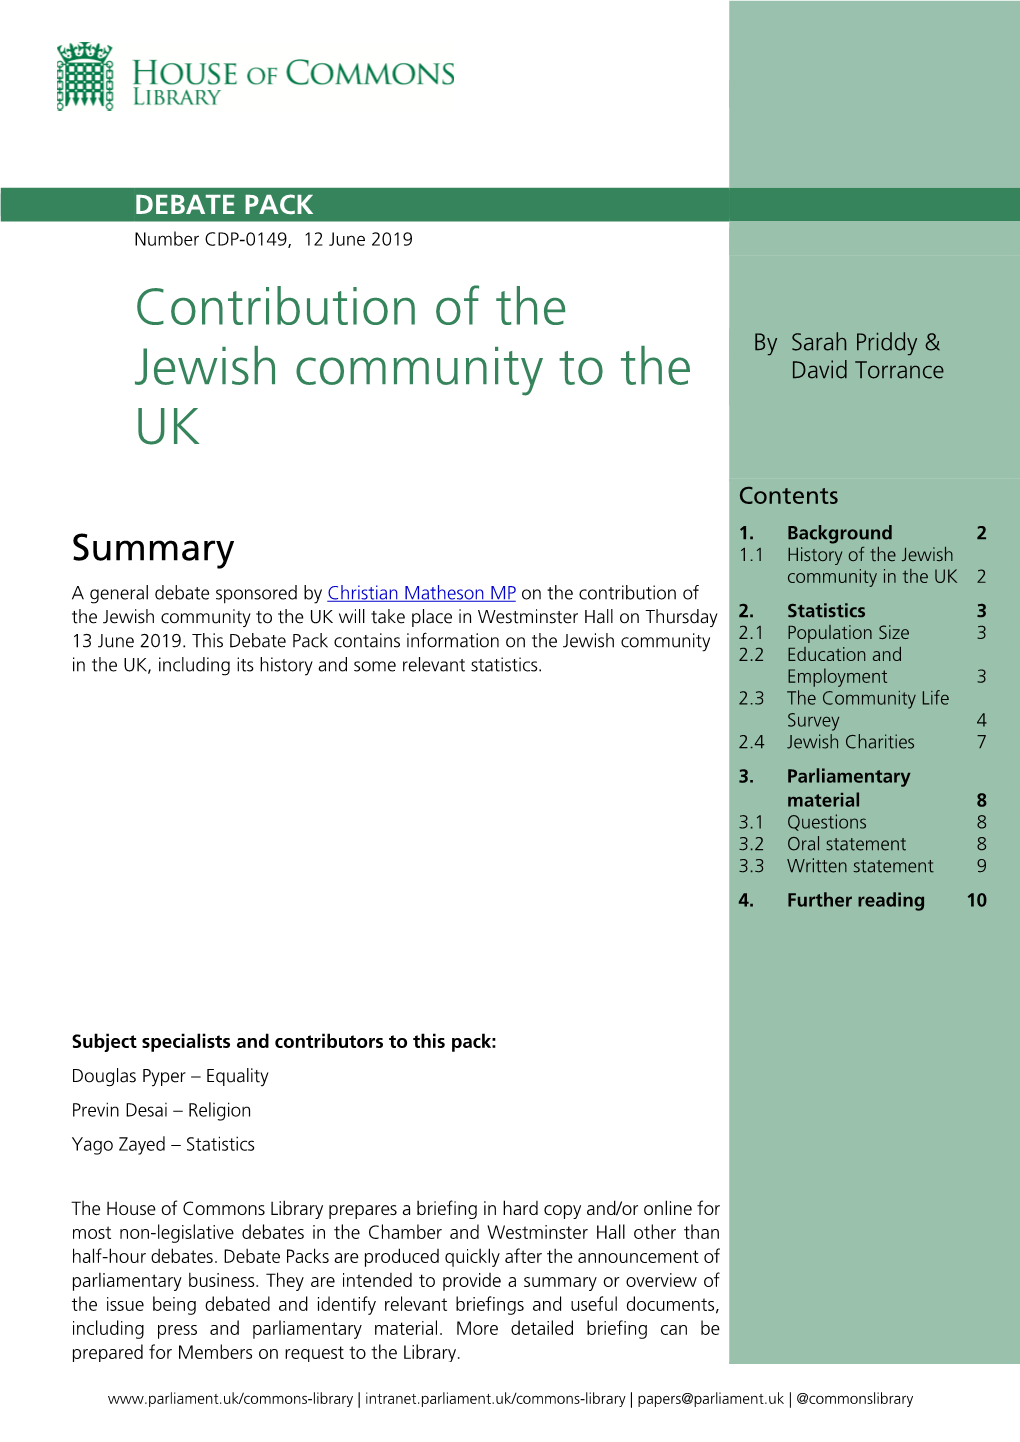 Contribution of the Jewish Community to the UK Will Take Place in Westminster Hall on Thursday 2